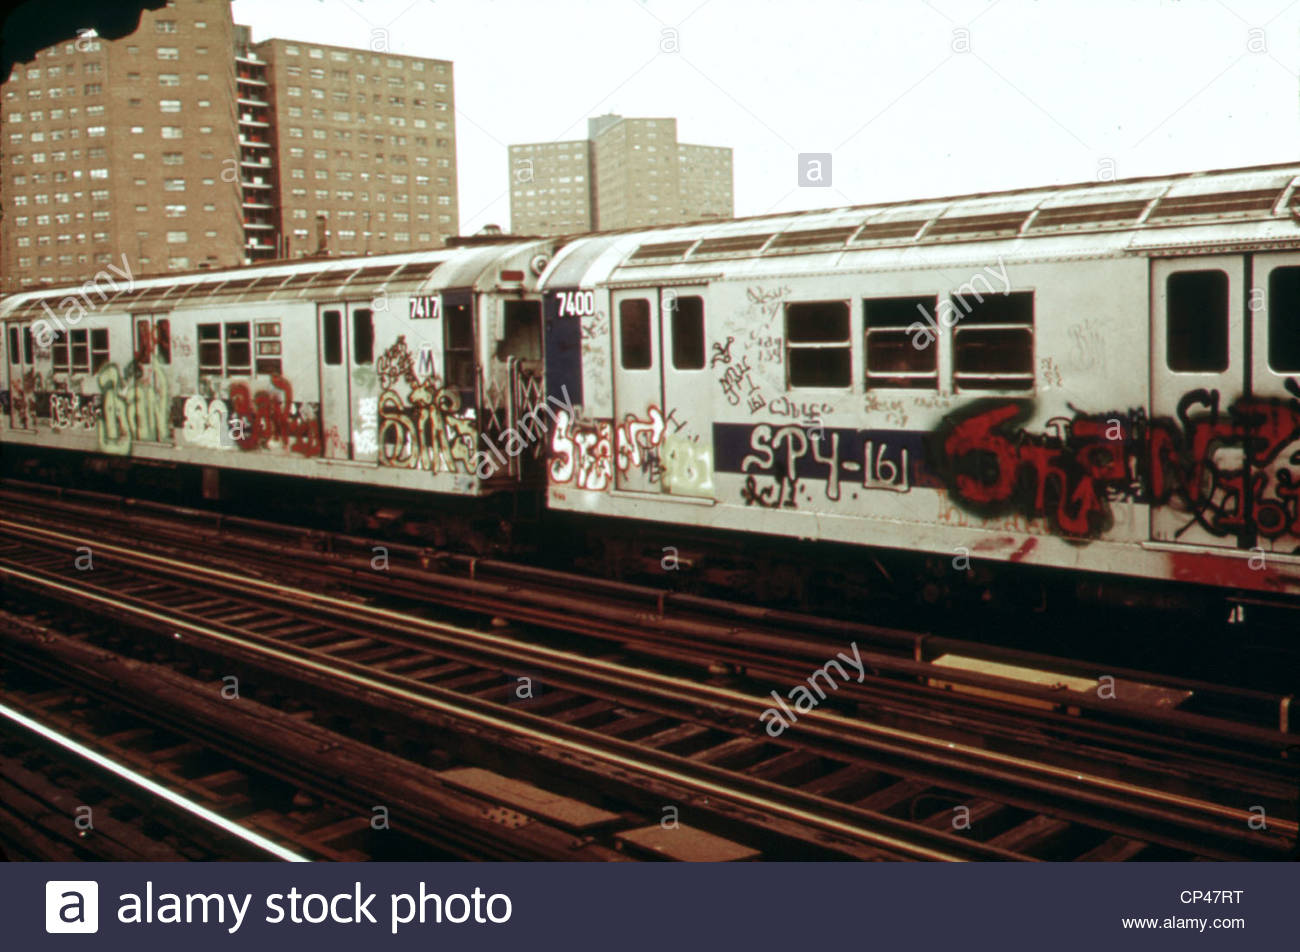 New York City Subway A Graffiti Painted Train With Housing